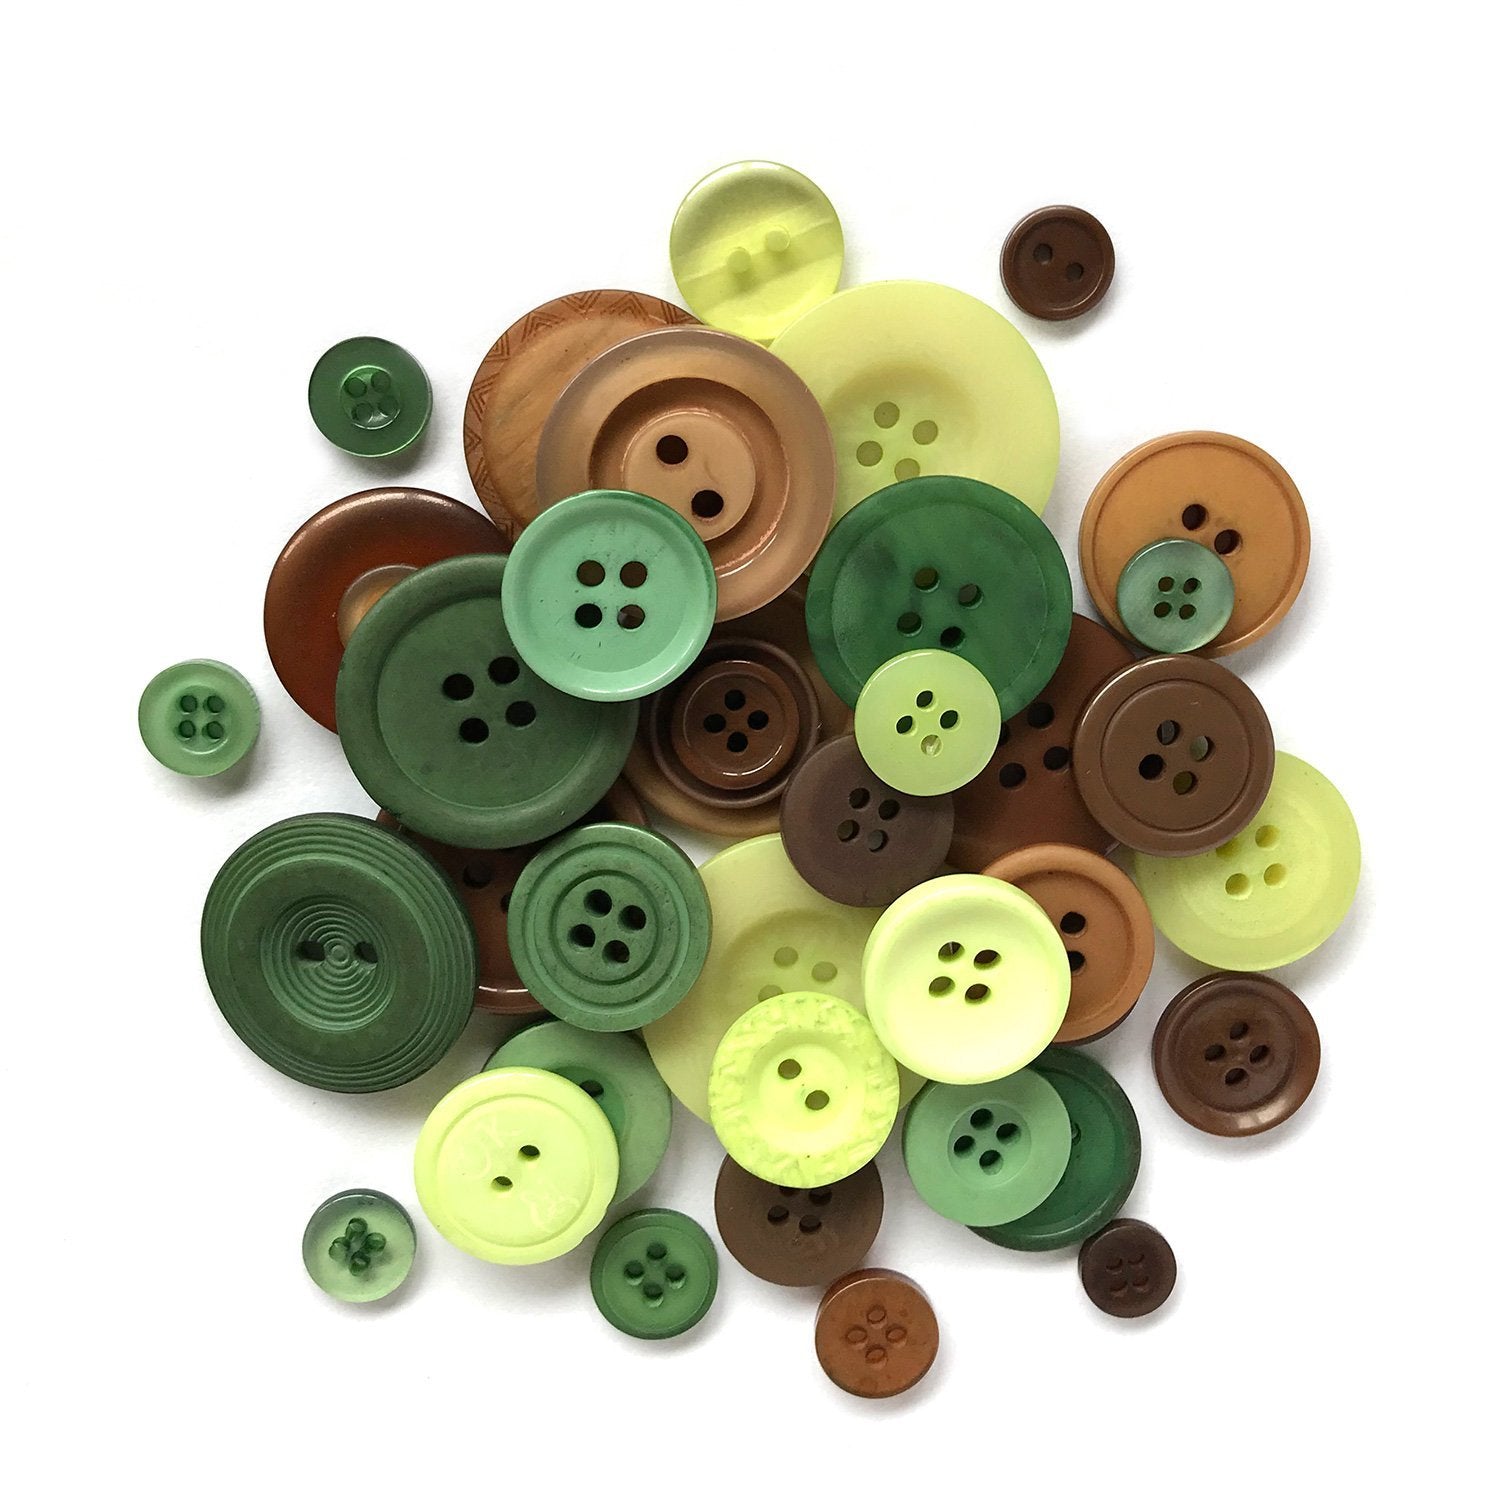 Going Green - HAB119 - Buttons Galore and More